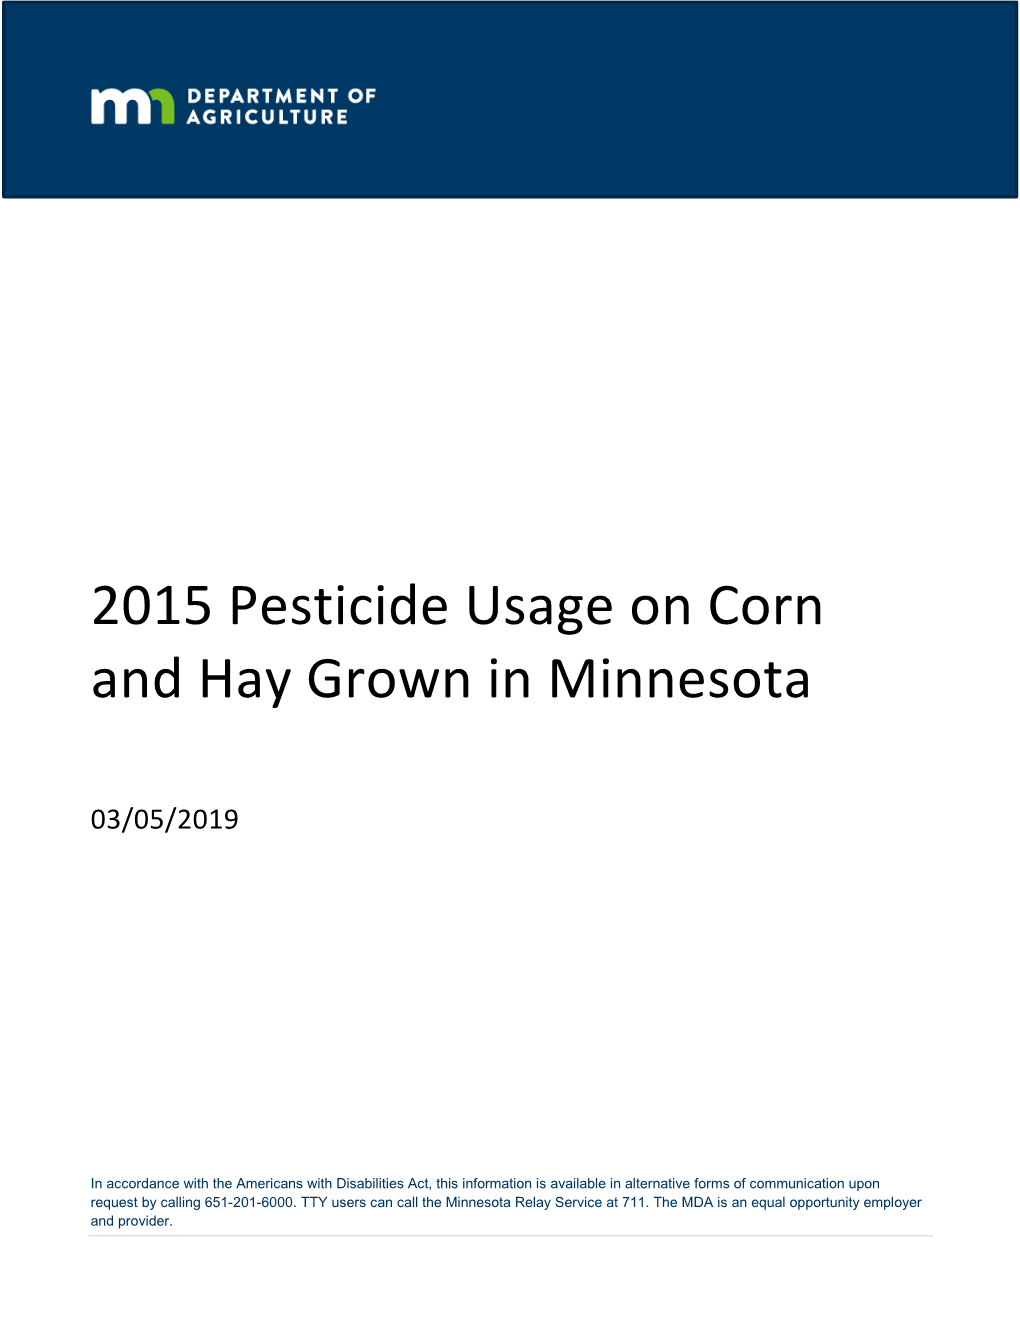 2015 Pesticide Usage on Corn and Hay Grown in Minnesota